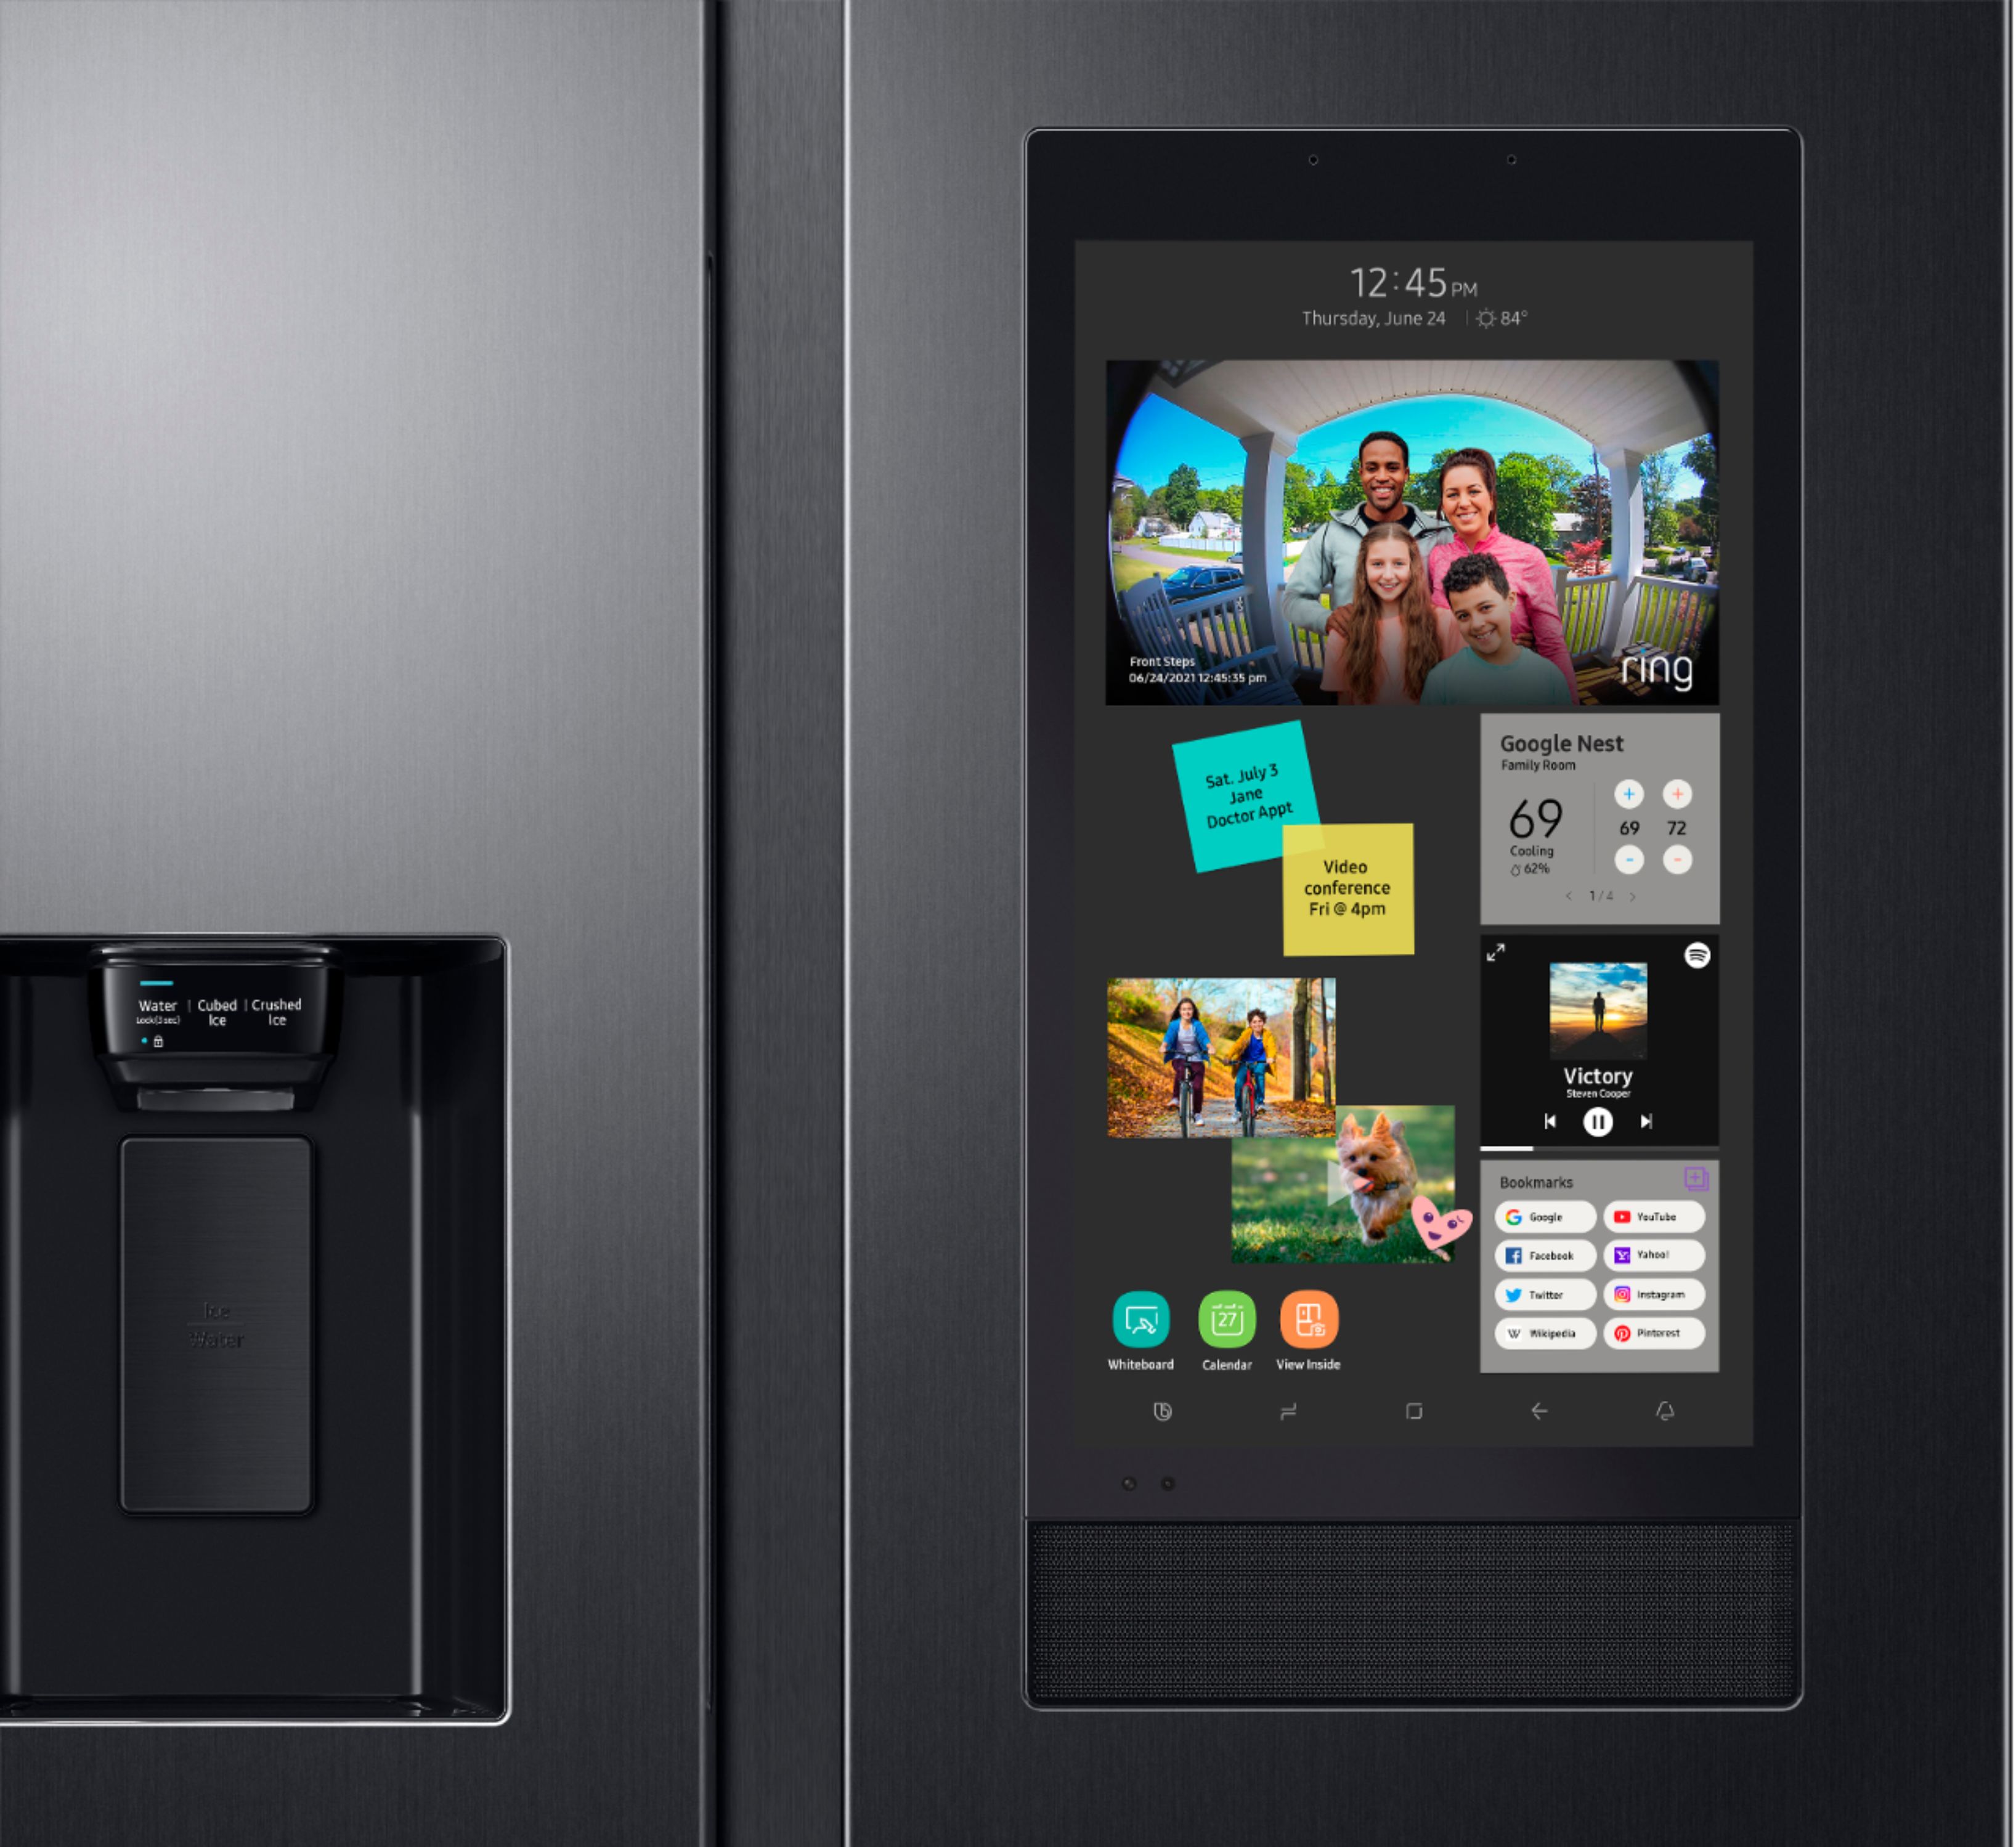 Samsung 26.7 Cu. ft. Large Capacity Side-By-Side Refrigerator with Touch Screen Family Hub - Stainless Steel